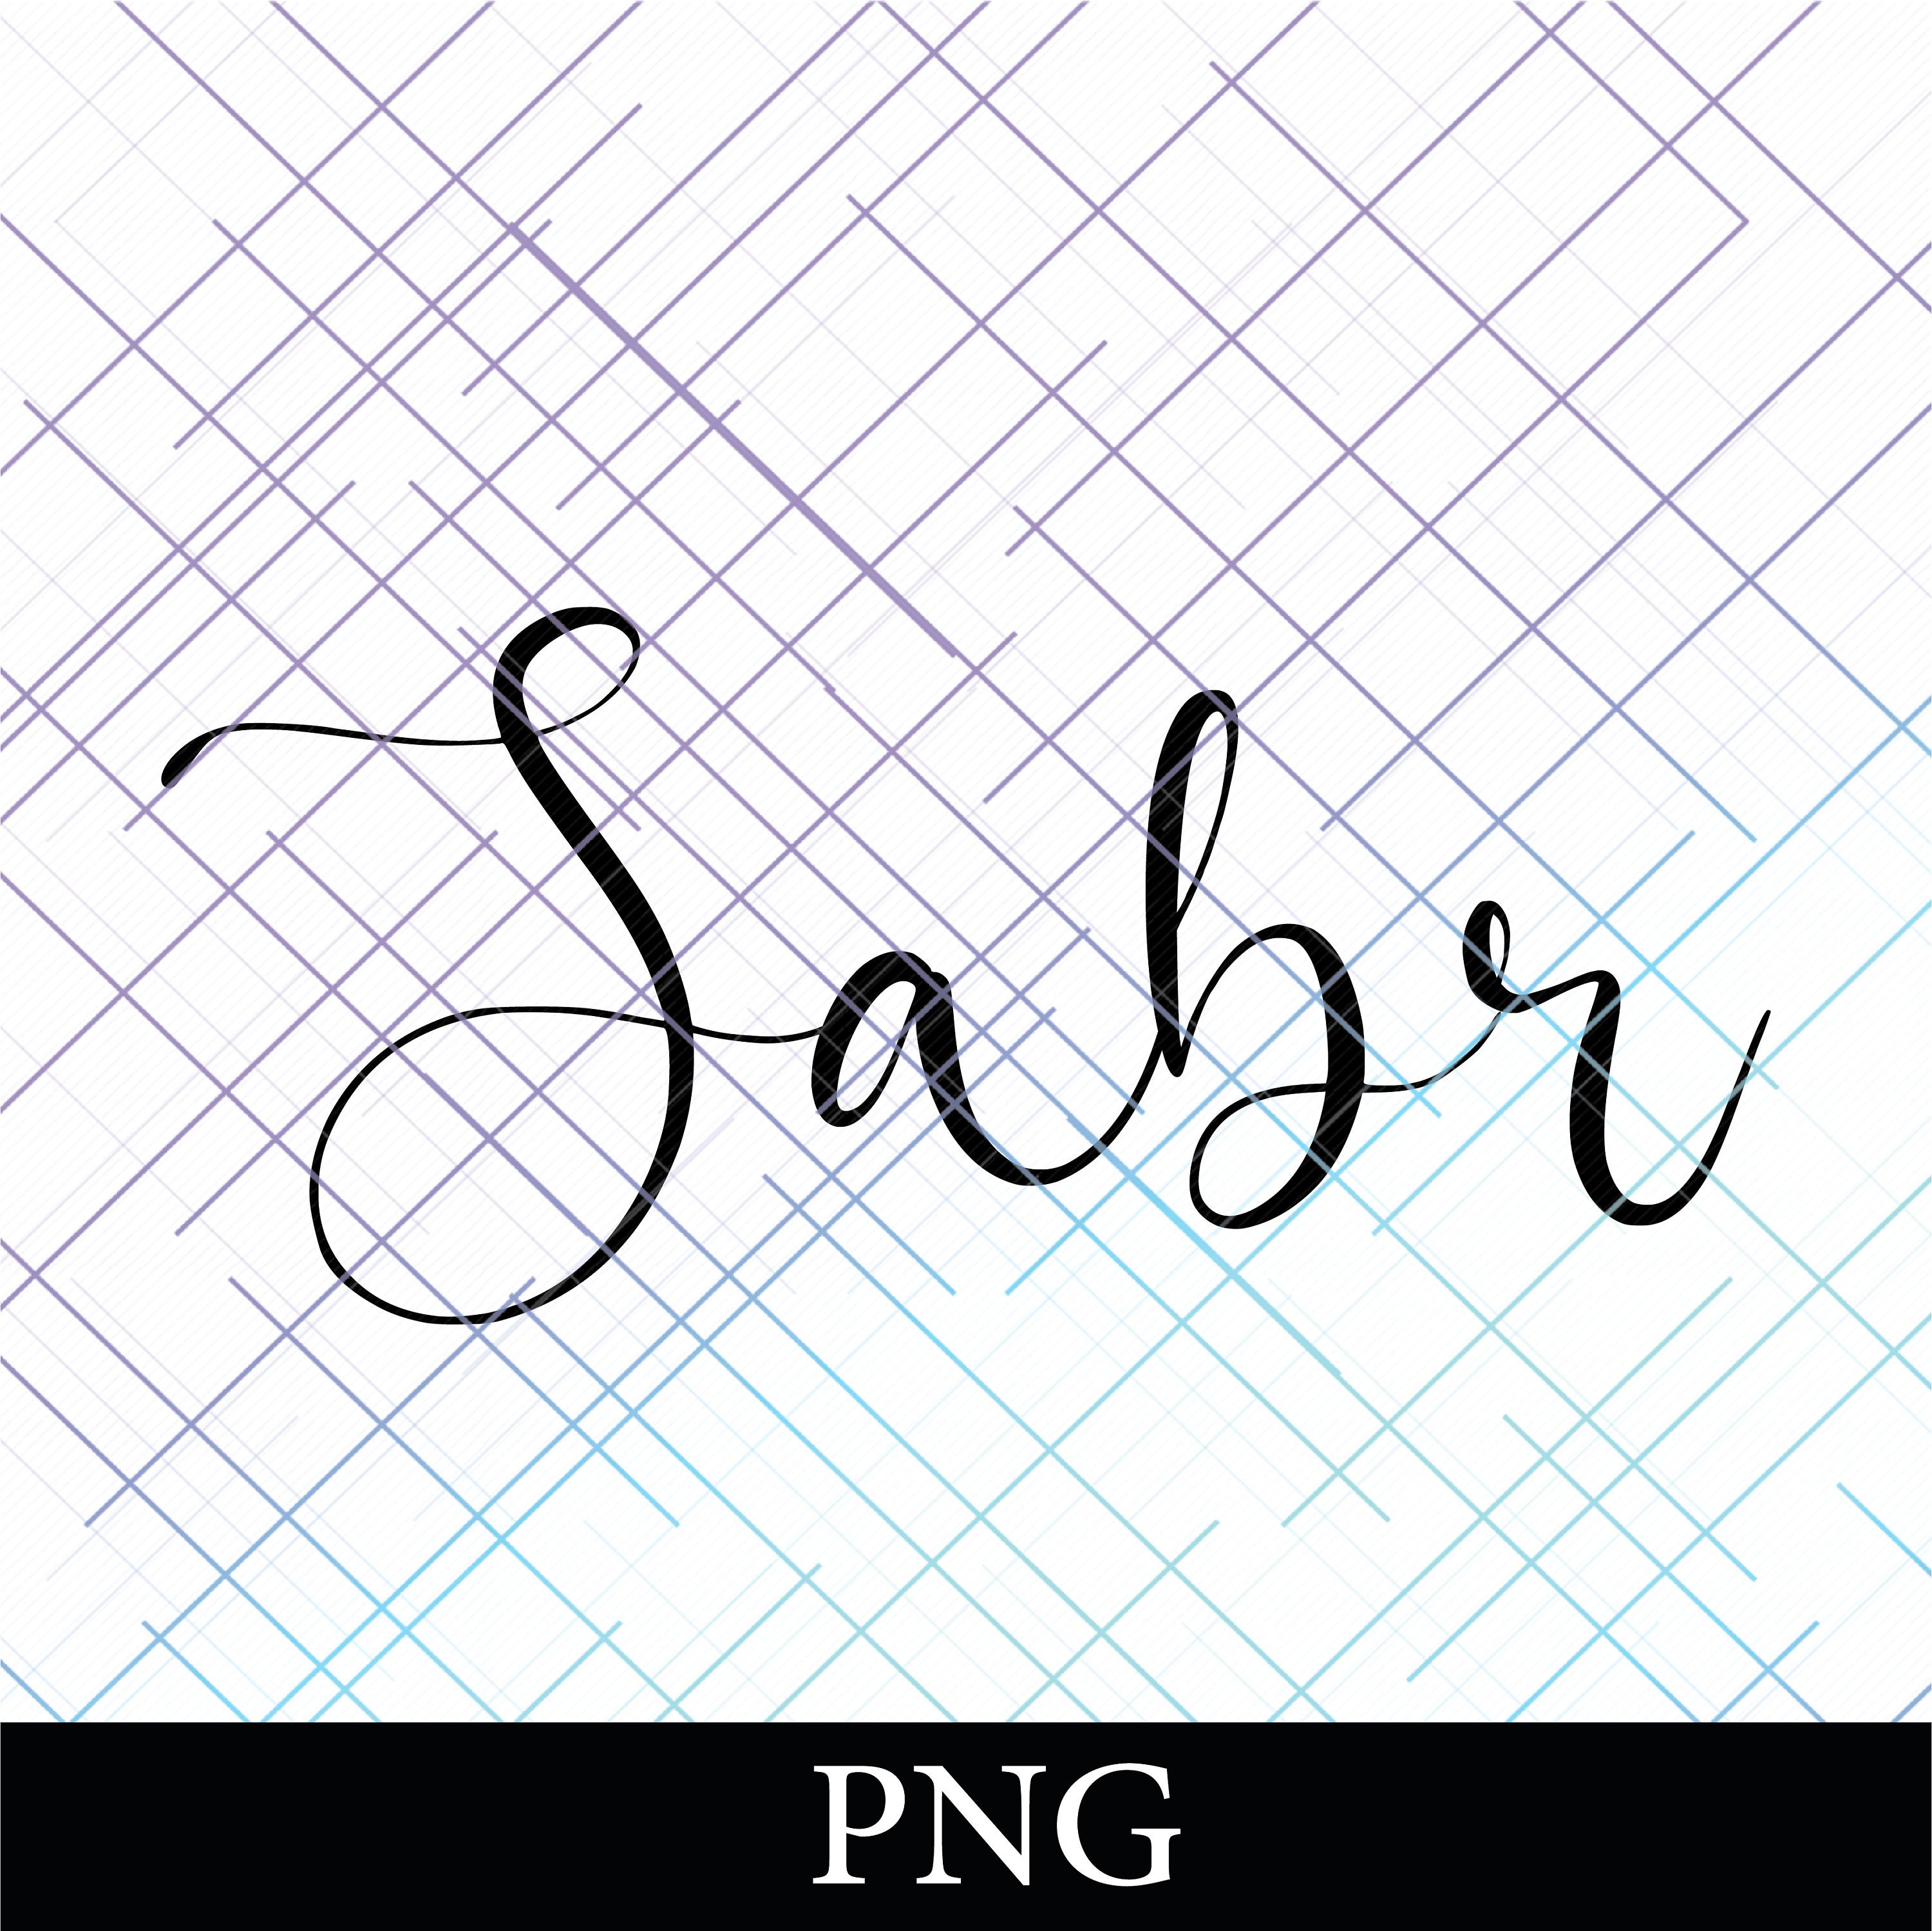 Sabr Patience 29 PNG. Arabic and English Calligraphy. Instant -   Portugal